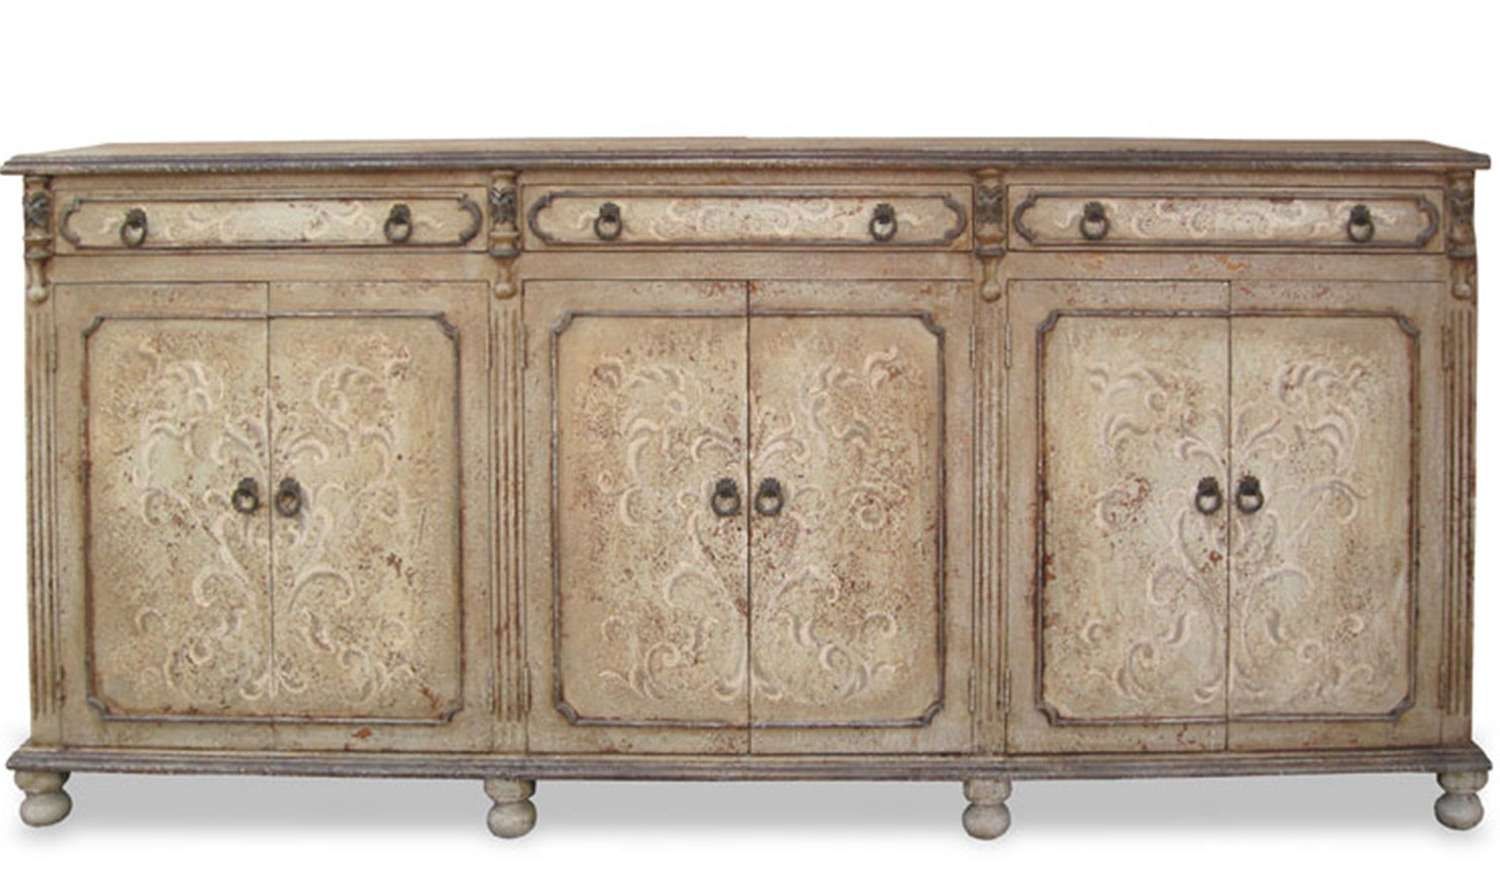 Hand Painted Torch Narrow Sideboard Mocha | Furniture, Finds And More Regarding Hand Painted Sideboards (View 1 of 20)